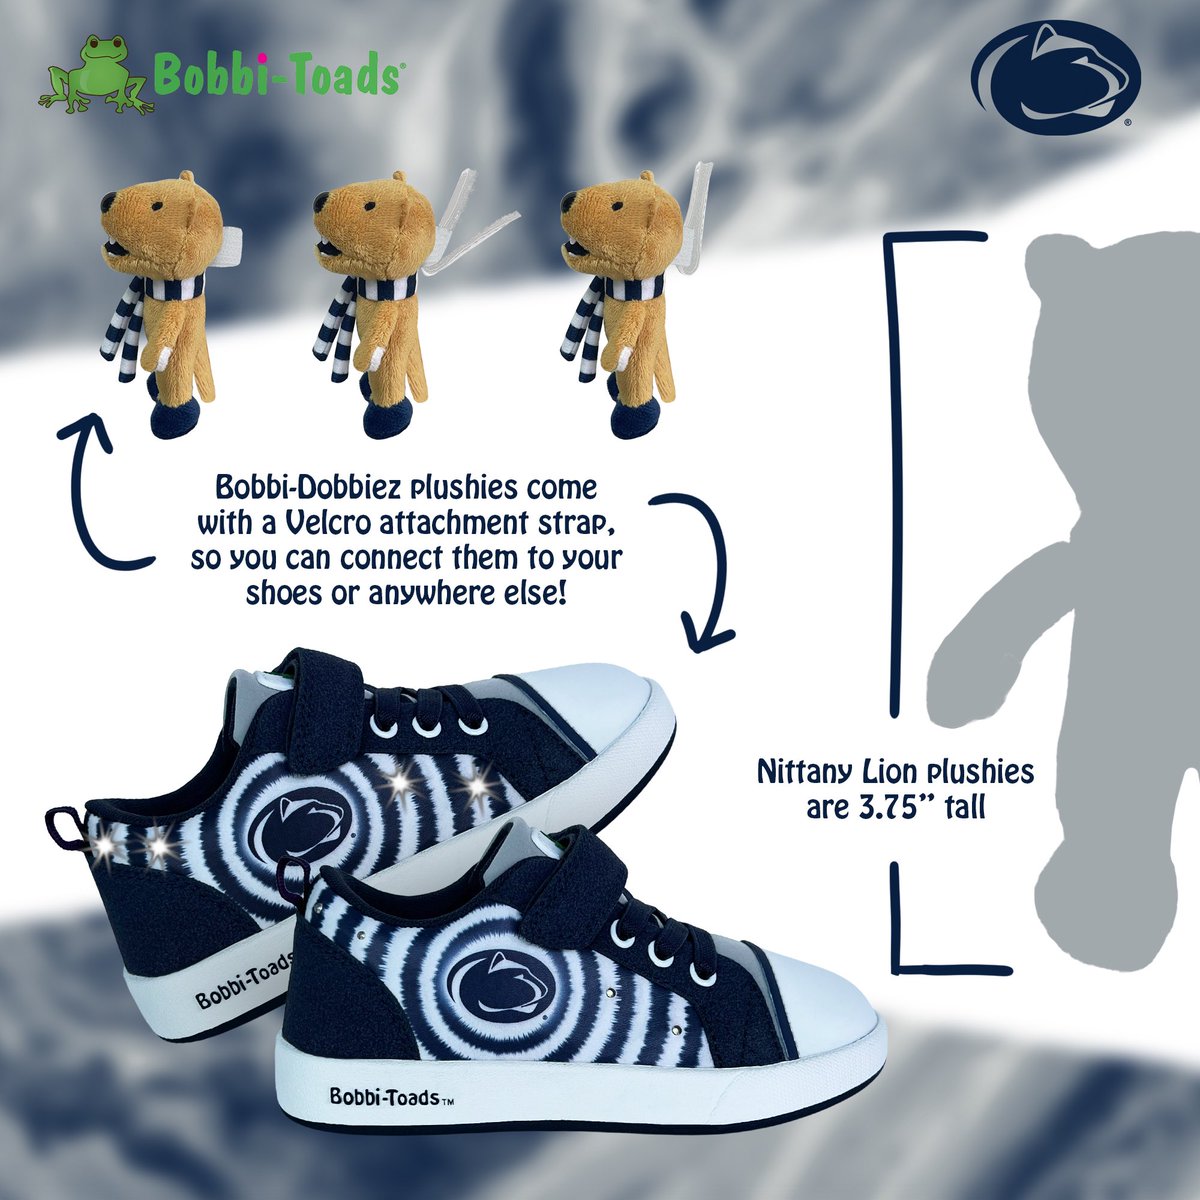 NEW PRODUCT ON AMAZON!! @penn_state kids’ light-up shoes + @NittanyLion mini plushie combo pack 🦁✨👟

Each pair comes with a Nittany Lion mascot Bobbi-Dobbiez mini plushie that can attach to the shoes or anywhere else!

Want some? Get some → amzn.to/3VUwHlY

#PennState